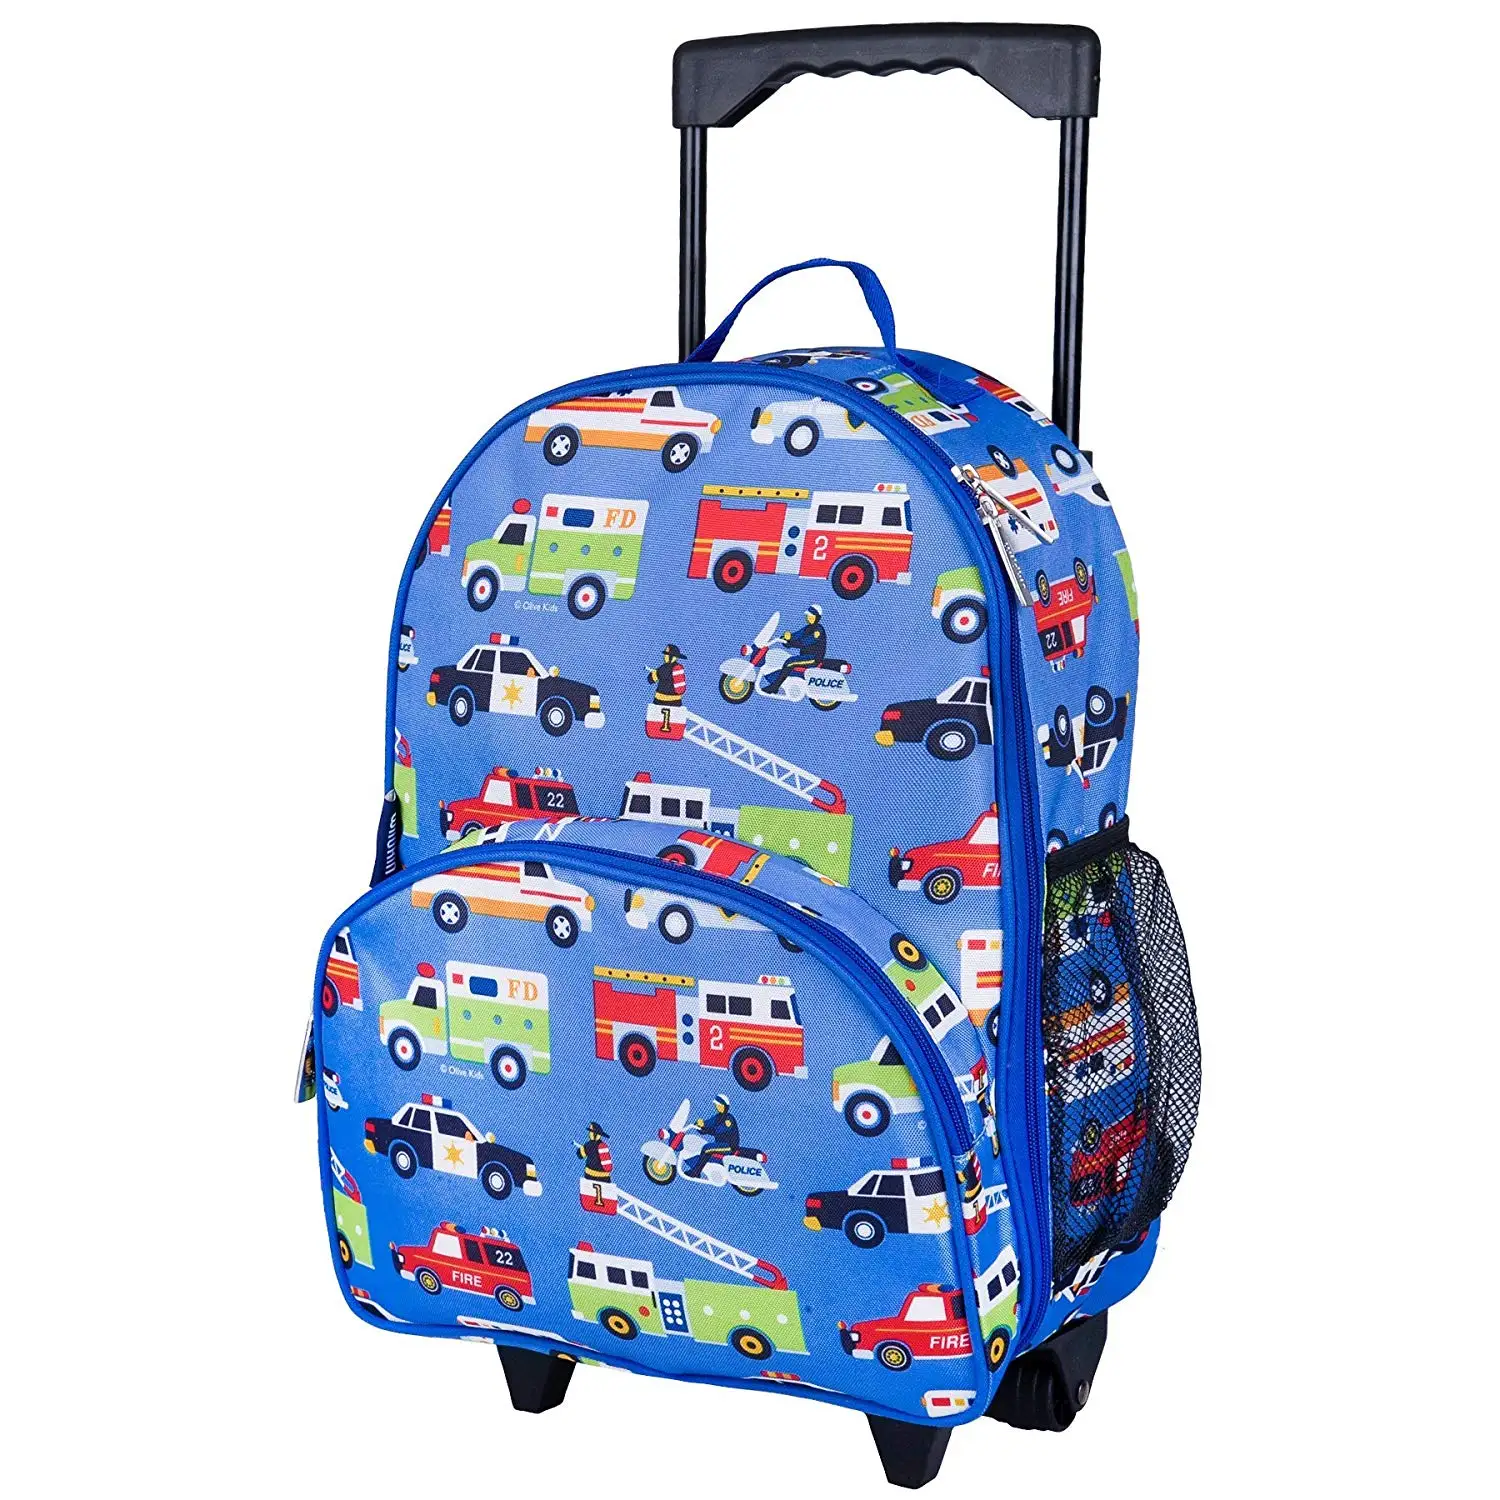 Cheap Rolling Kids Luggage, find Rolling Kids Luggage deals on line at www.waldenwongart.com